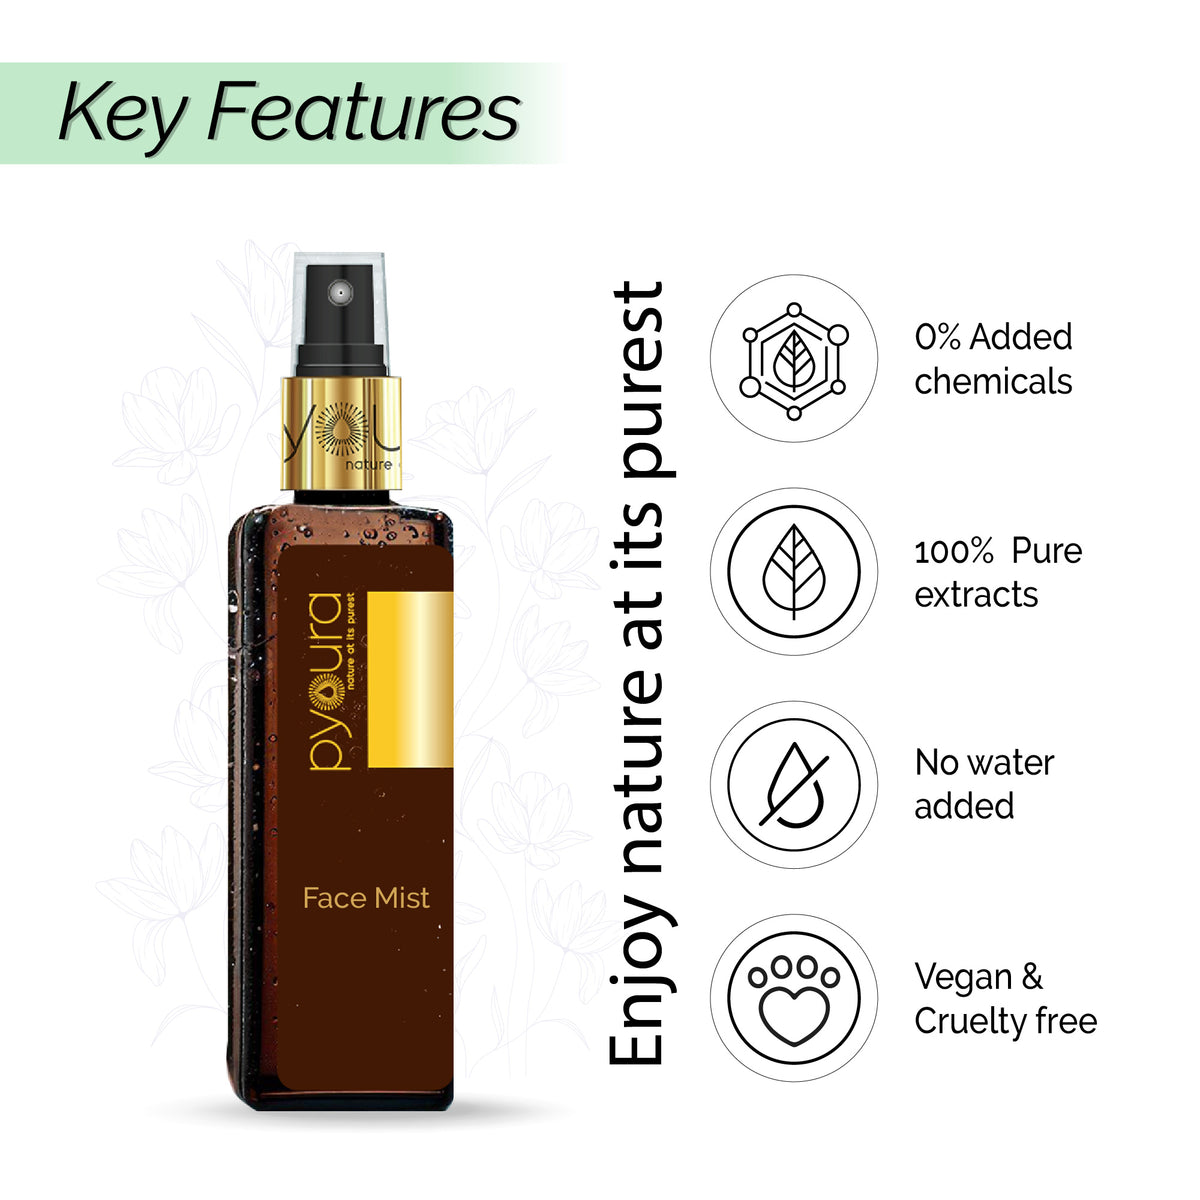 Rose + Aloe vera + Khus Face Mist Summer Skincare Kit <h4> Soothe Hydrate Sunburn & Refresh with these 100% pure, alcohol free extracts<h4><h6>100 ml each Pack of 3<h6>